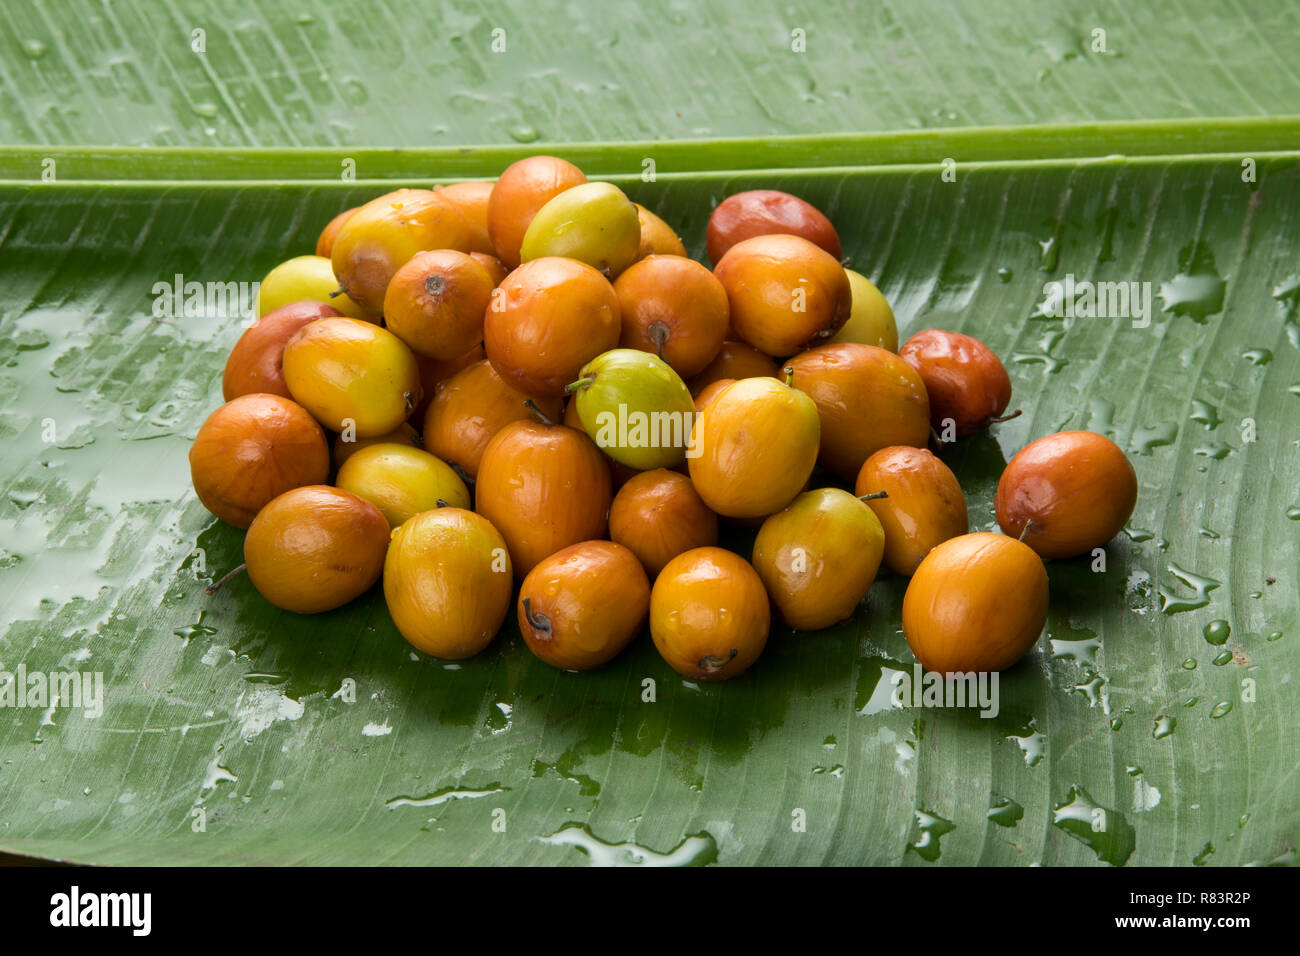 Ber Fruit High Resolution Stock Photography and Images - Alamy